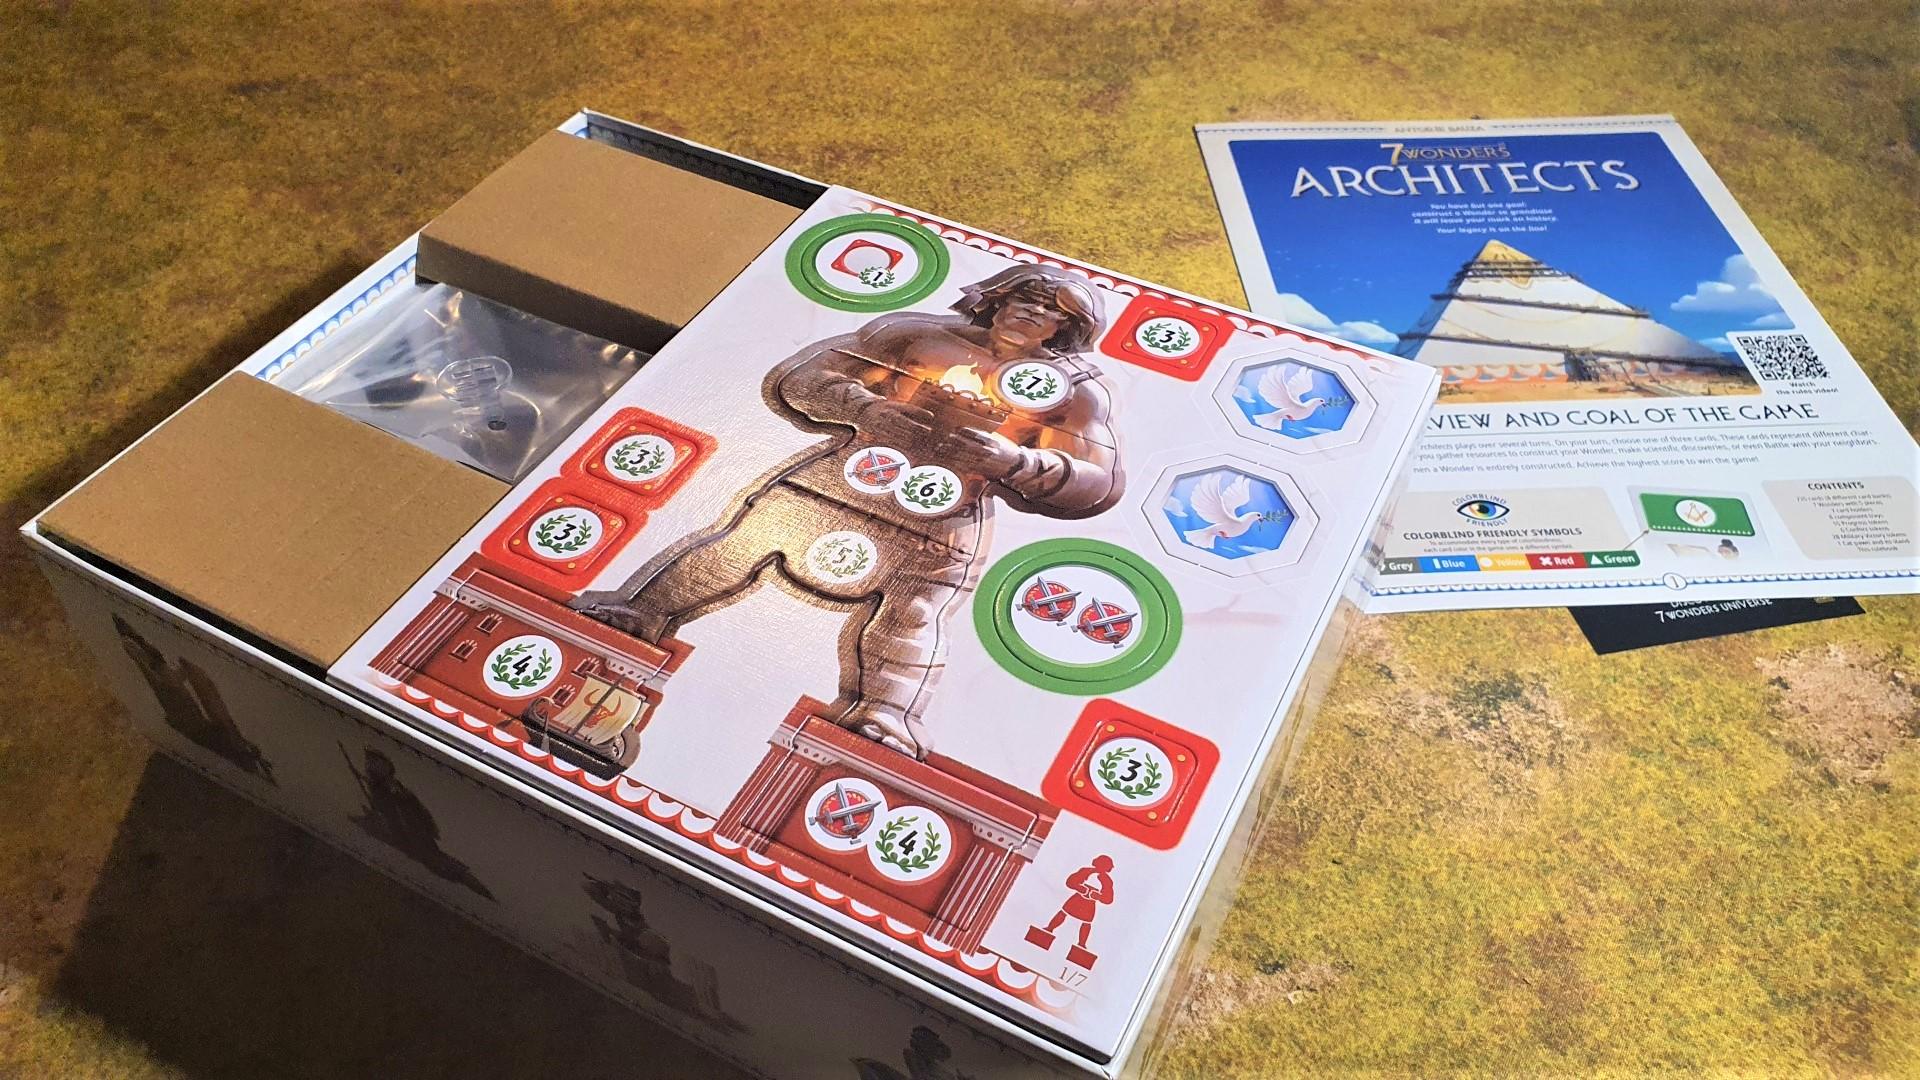 https://www.wargamer.com/wp-content/uploads/2021/11/7-wonders-architects-board-game-review-box-open-punchboards.jpg